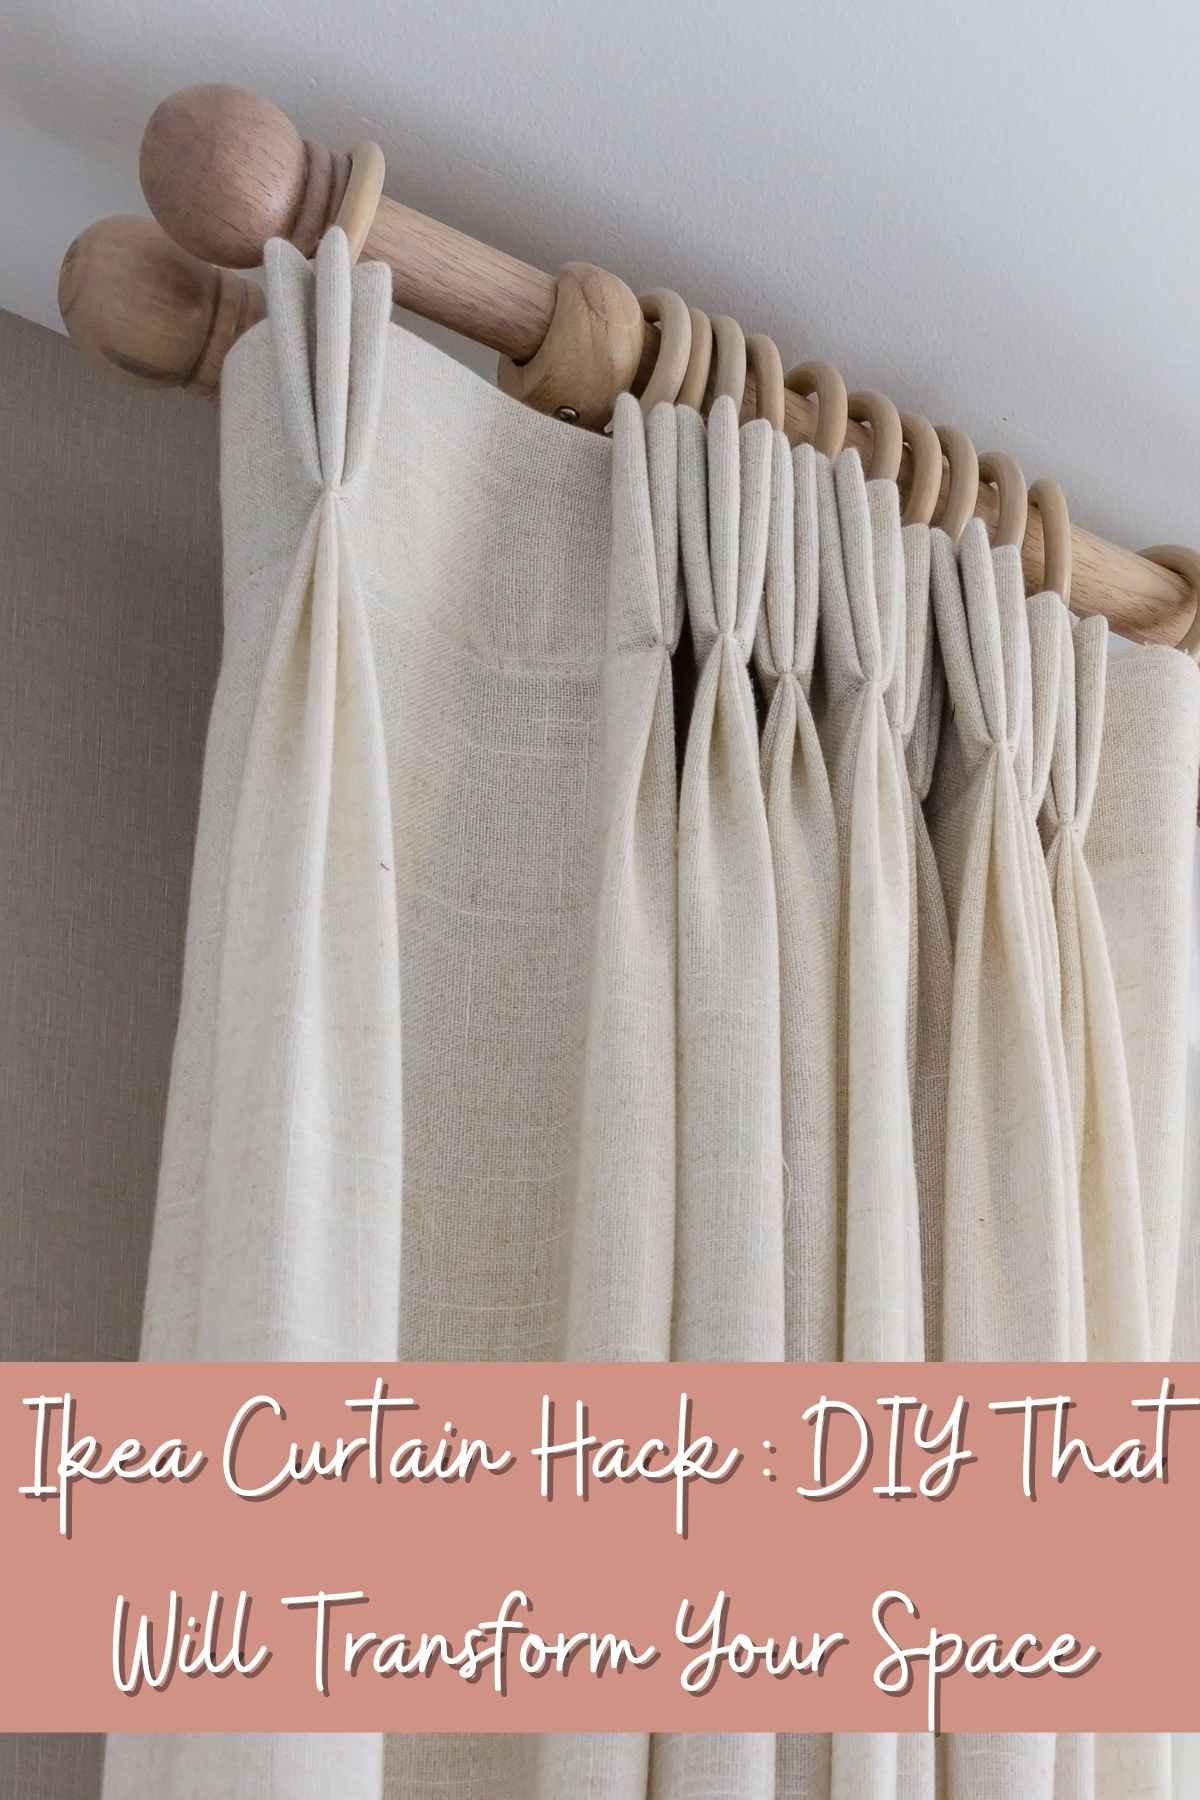 Ikea Curtain Hack: DIY That Will Transform Your Space. Up Close photo of curtains